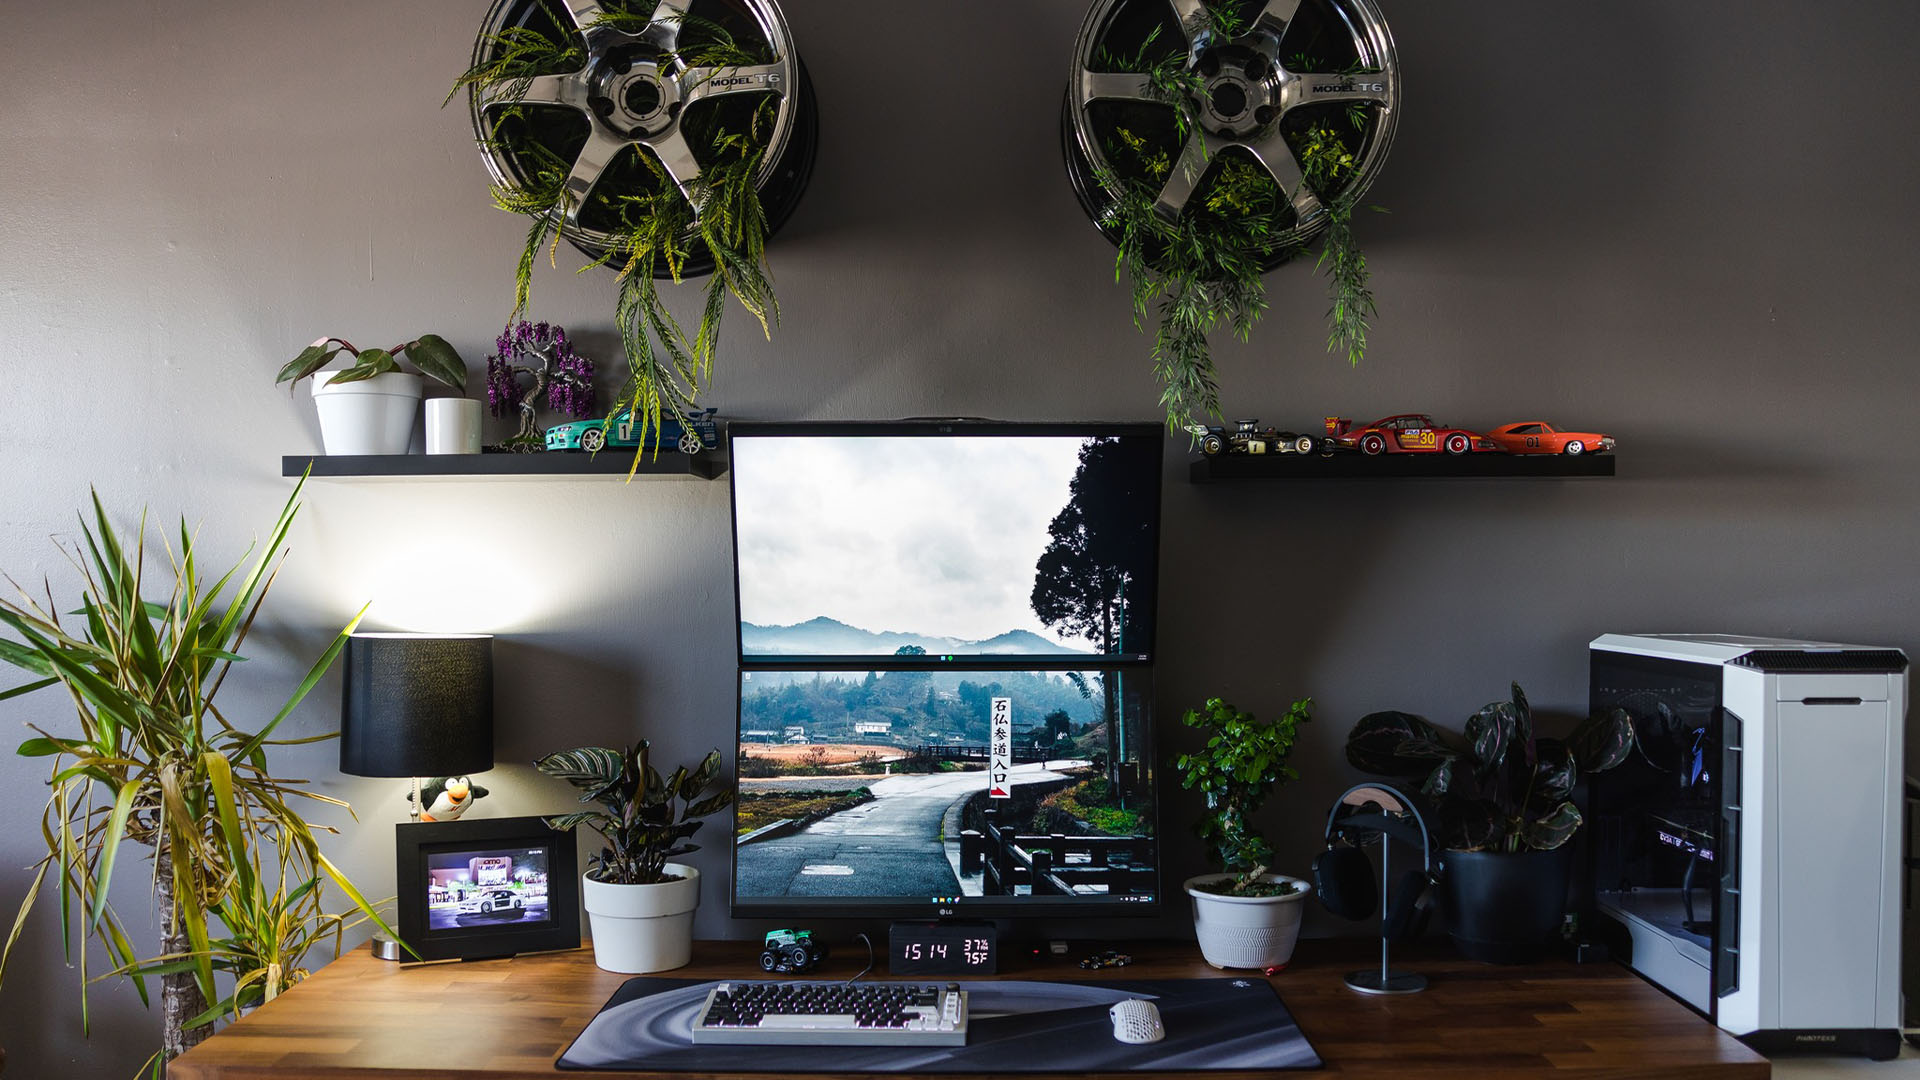 This AMD-powered PC gaming setup is all about cars and plants